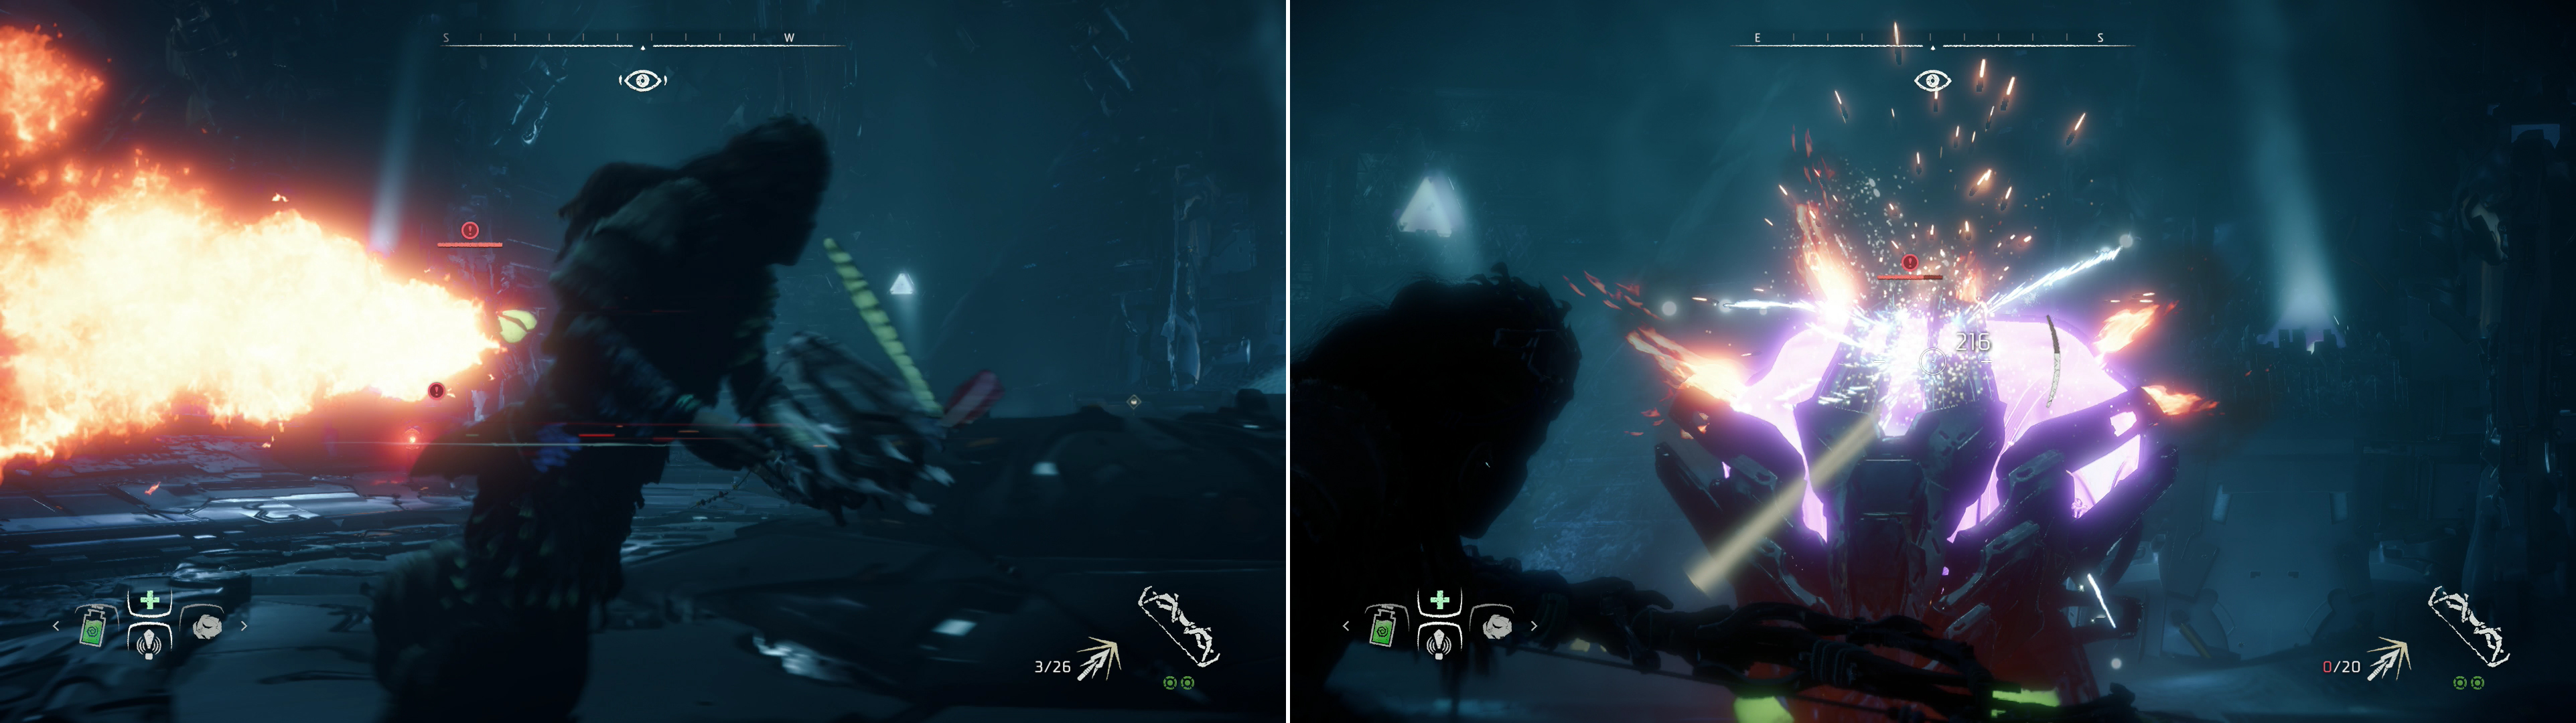 Dodge the Fire Bellowback’s attacks (left) and target its Cargo Sac (right) and Gullet, which will explode when destroyed.